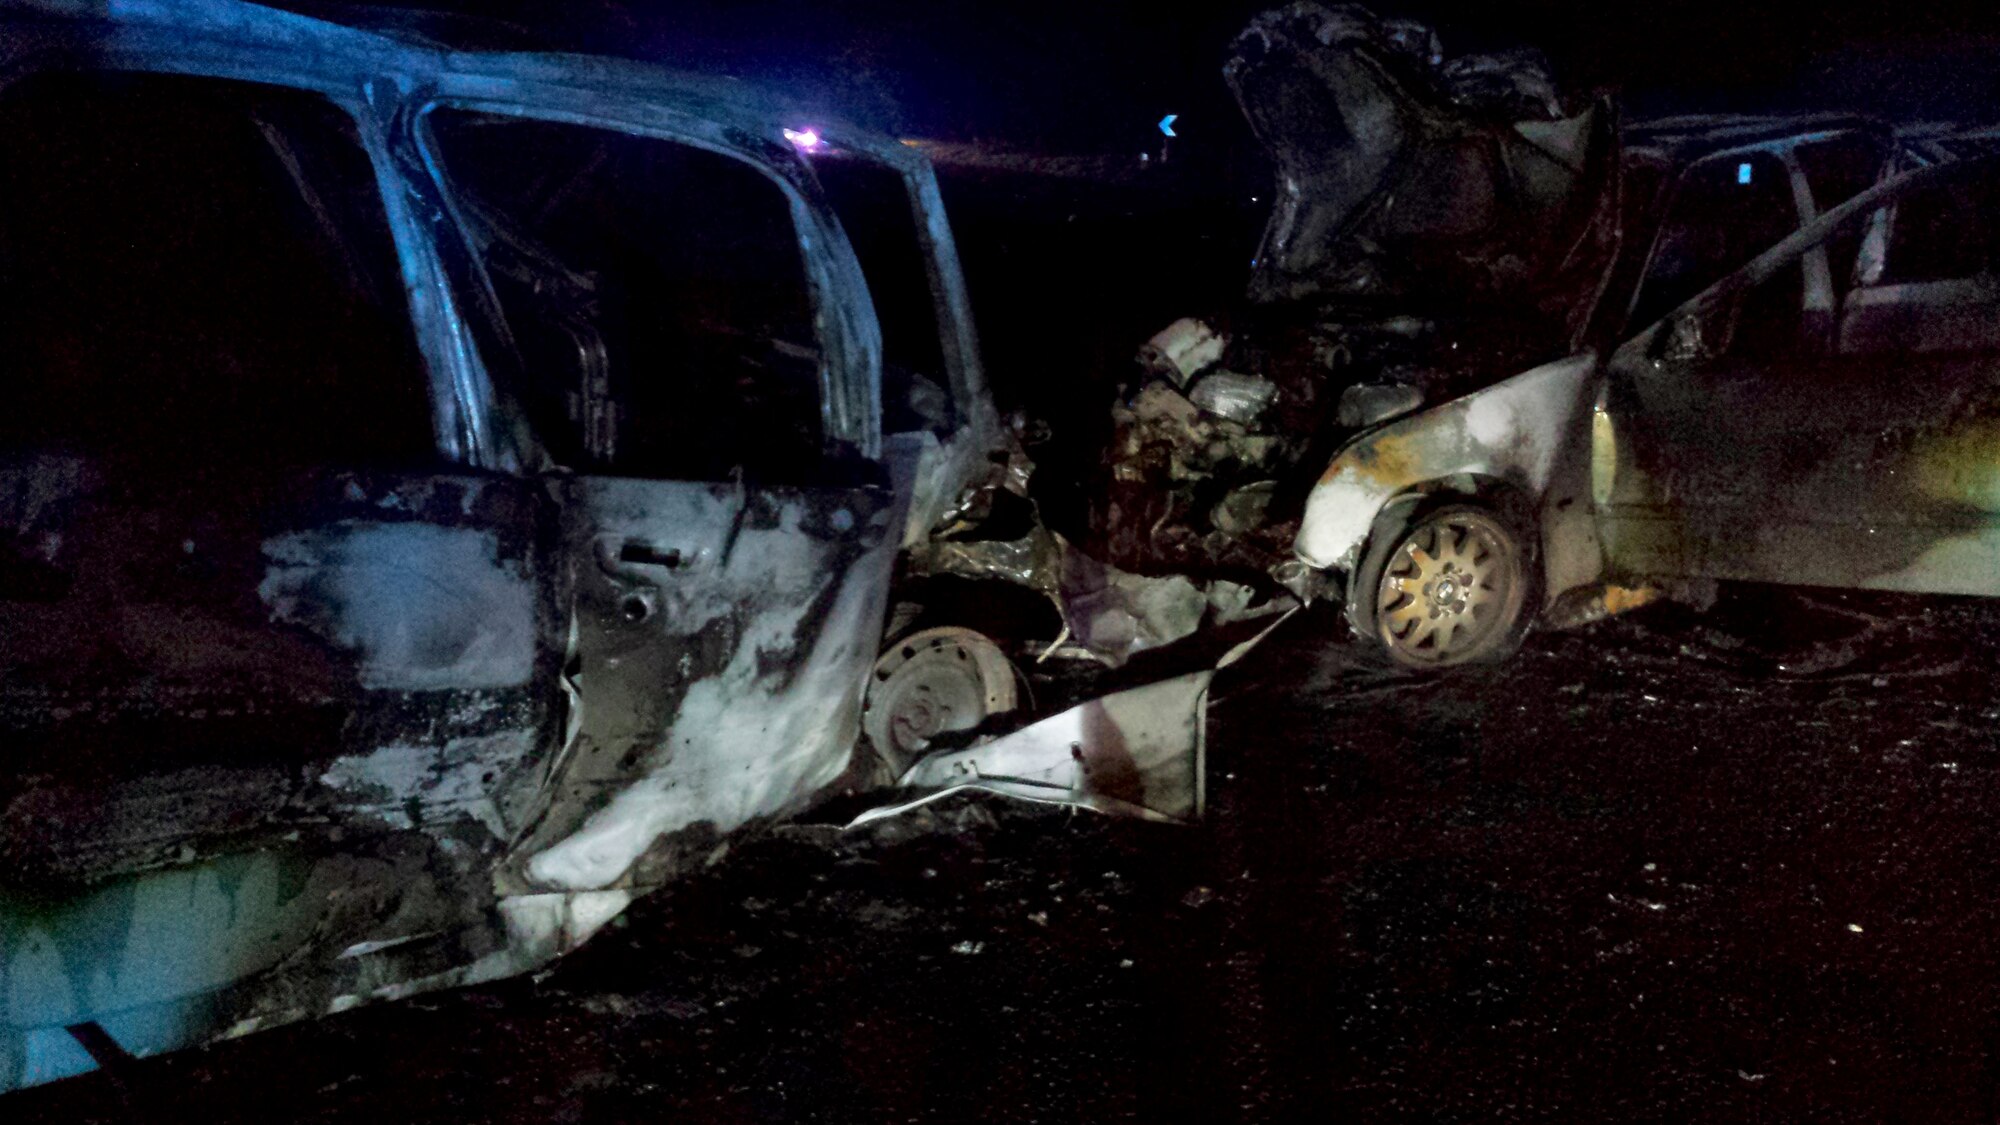 What is left of two cars after a potentially fatal accident sits on the side of the road May 12, 2014, near Royal Air Force Mildenhall, England. Staff Sgt. Vicente Gomez, a 100th Aircraft Maintenance Squadron crew chief, performed life-saving assistance to the victims of the crash. Gomez was presented with the Airman’s Medal for his courageous acts. (Courtesy photo)